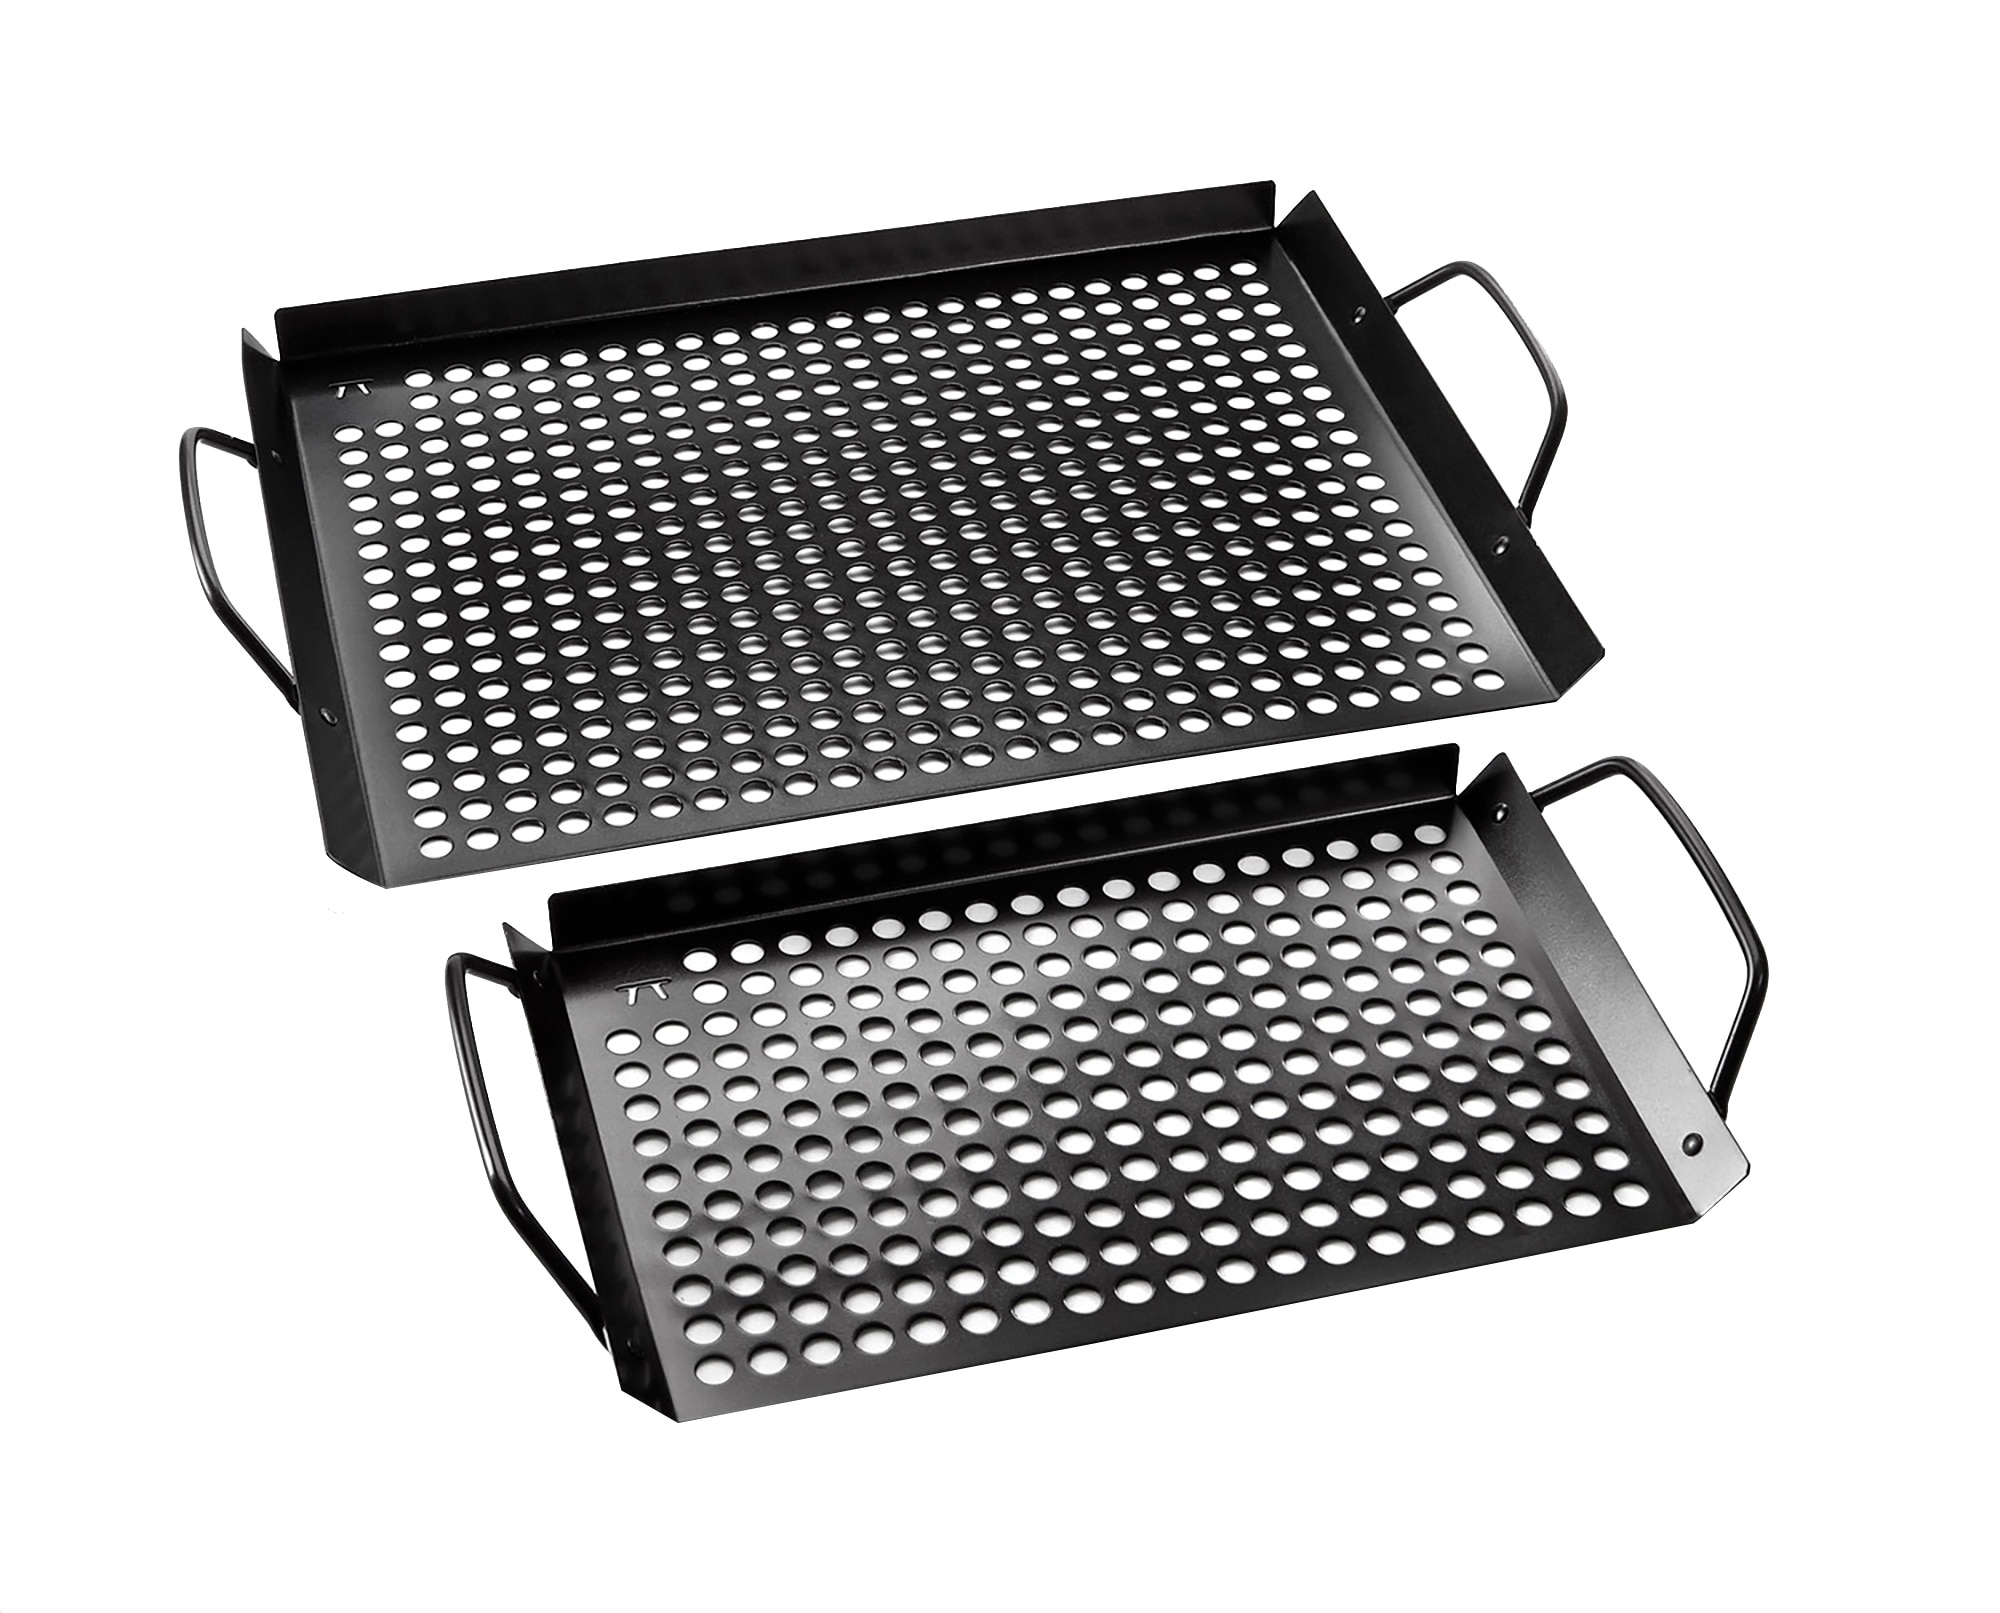 outset grill